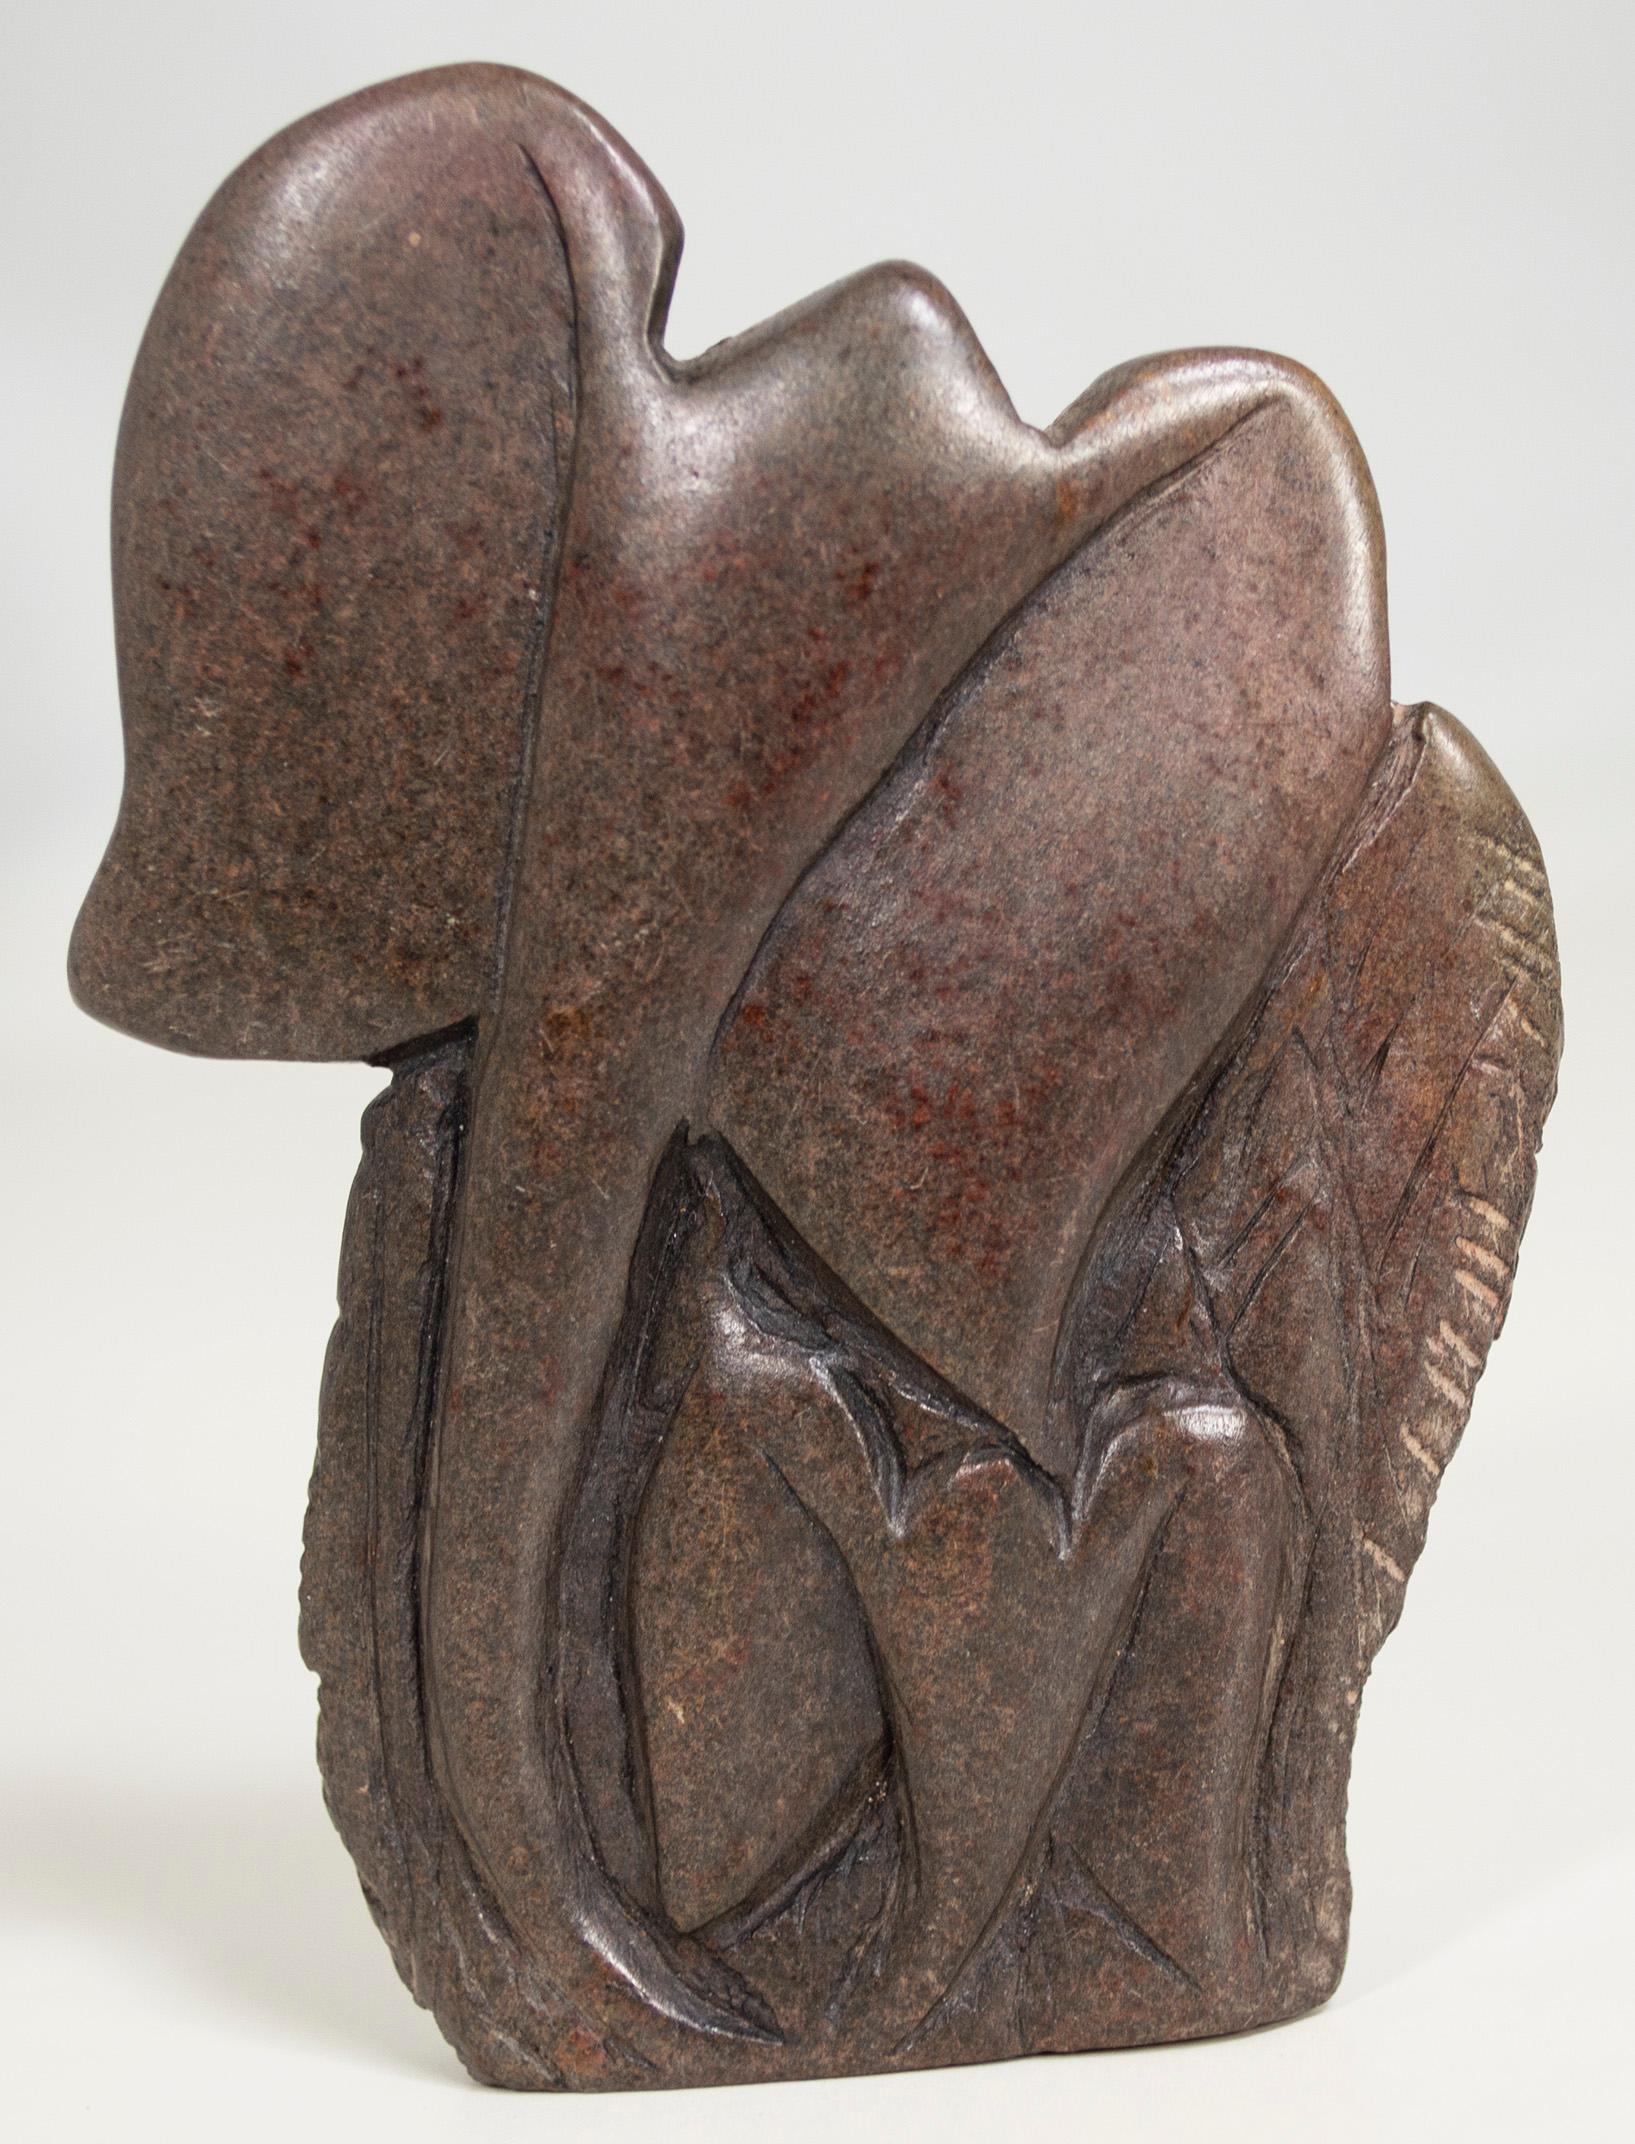 Unknown Figurative Sculpture - 'Mother and Baby Elephant' original African Shona stone sculpture Zimbabwe